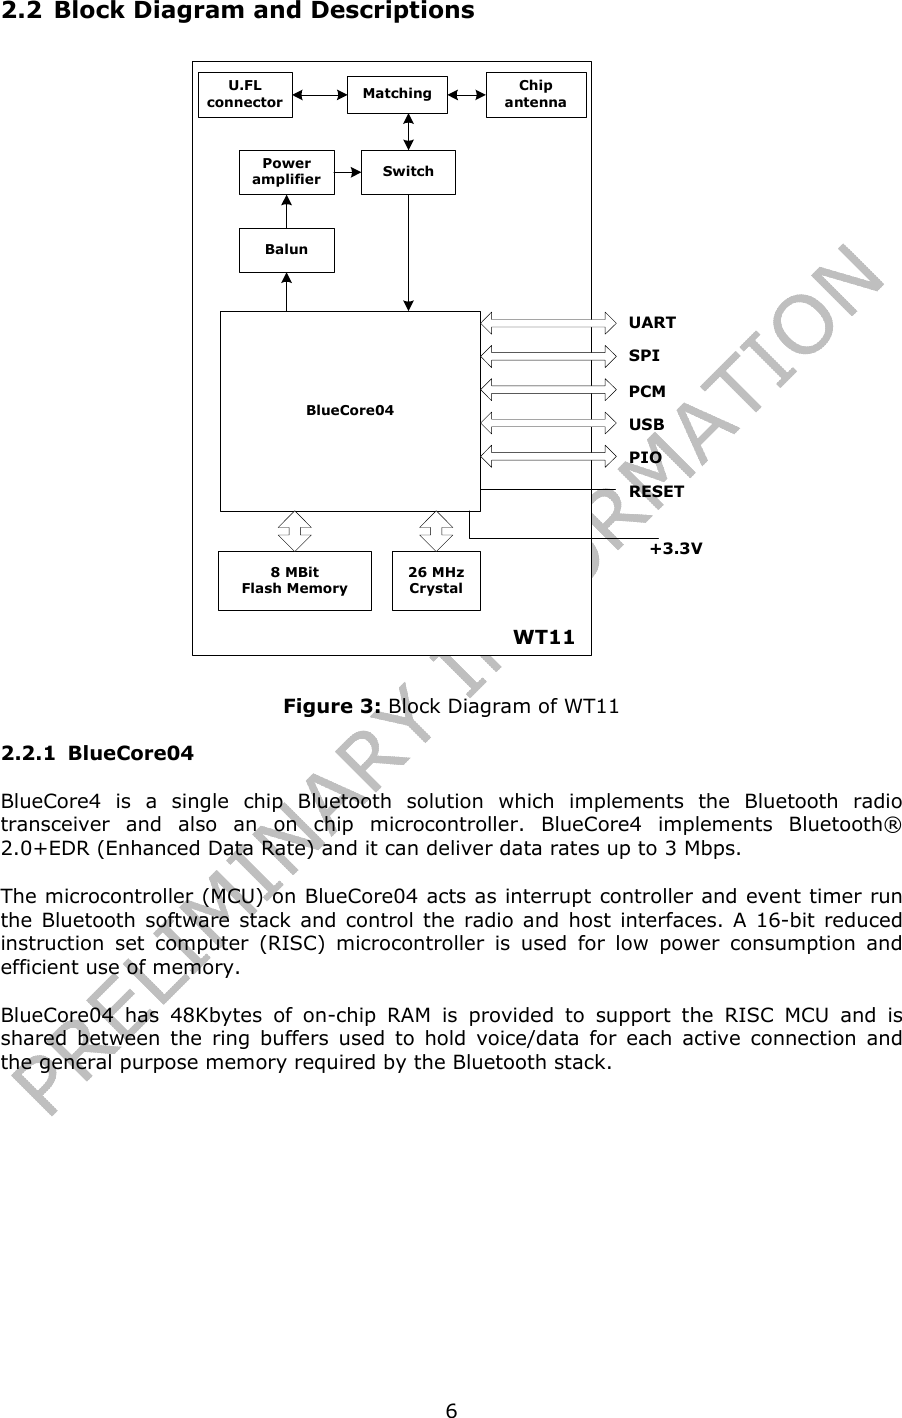   62.2 Block Diagram and Descriptions +3.3VU.FLconnector MatchingBlueCore048 MBitFlash Memory26 MHzCrystalUARTSPIPCMUSBPIOWT11RESETChipantennaBalunPoweramplifier Switch Figure 3: Block Diagram of WT11 2.2.1 BlueCore04 BlueCore4 is a single chip Bluetooth solution which implements the Bluetooth radio transceiver and also an on chip microcontroller. BlueCore4 implements Bluetooth® 2.0+EDR (Enhanced Data Rate) and it can deliver data rates up to 3 Mbps. The microcontroller (MCU) on BlueCore04 acts as interrupt controller and event timer run the Bluetooth software stack and control the radio and host interfaces. A 16-bit reduced instruction set computer (RISC) microcontroller is used for low power consumption and efficient use of memory. BlueCore04 has 48Kbytes of on-chip RAM is provided to support the RISC MCU and is shared between the ring buffers used to hold voice/data for each active connection and the general purpose memory required by the Bluetooth stack. 